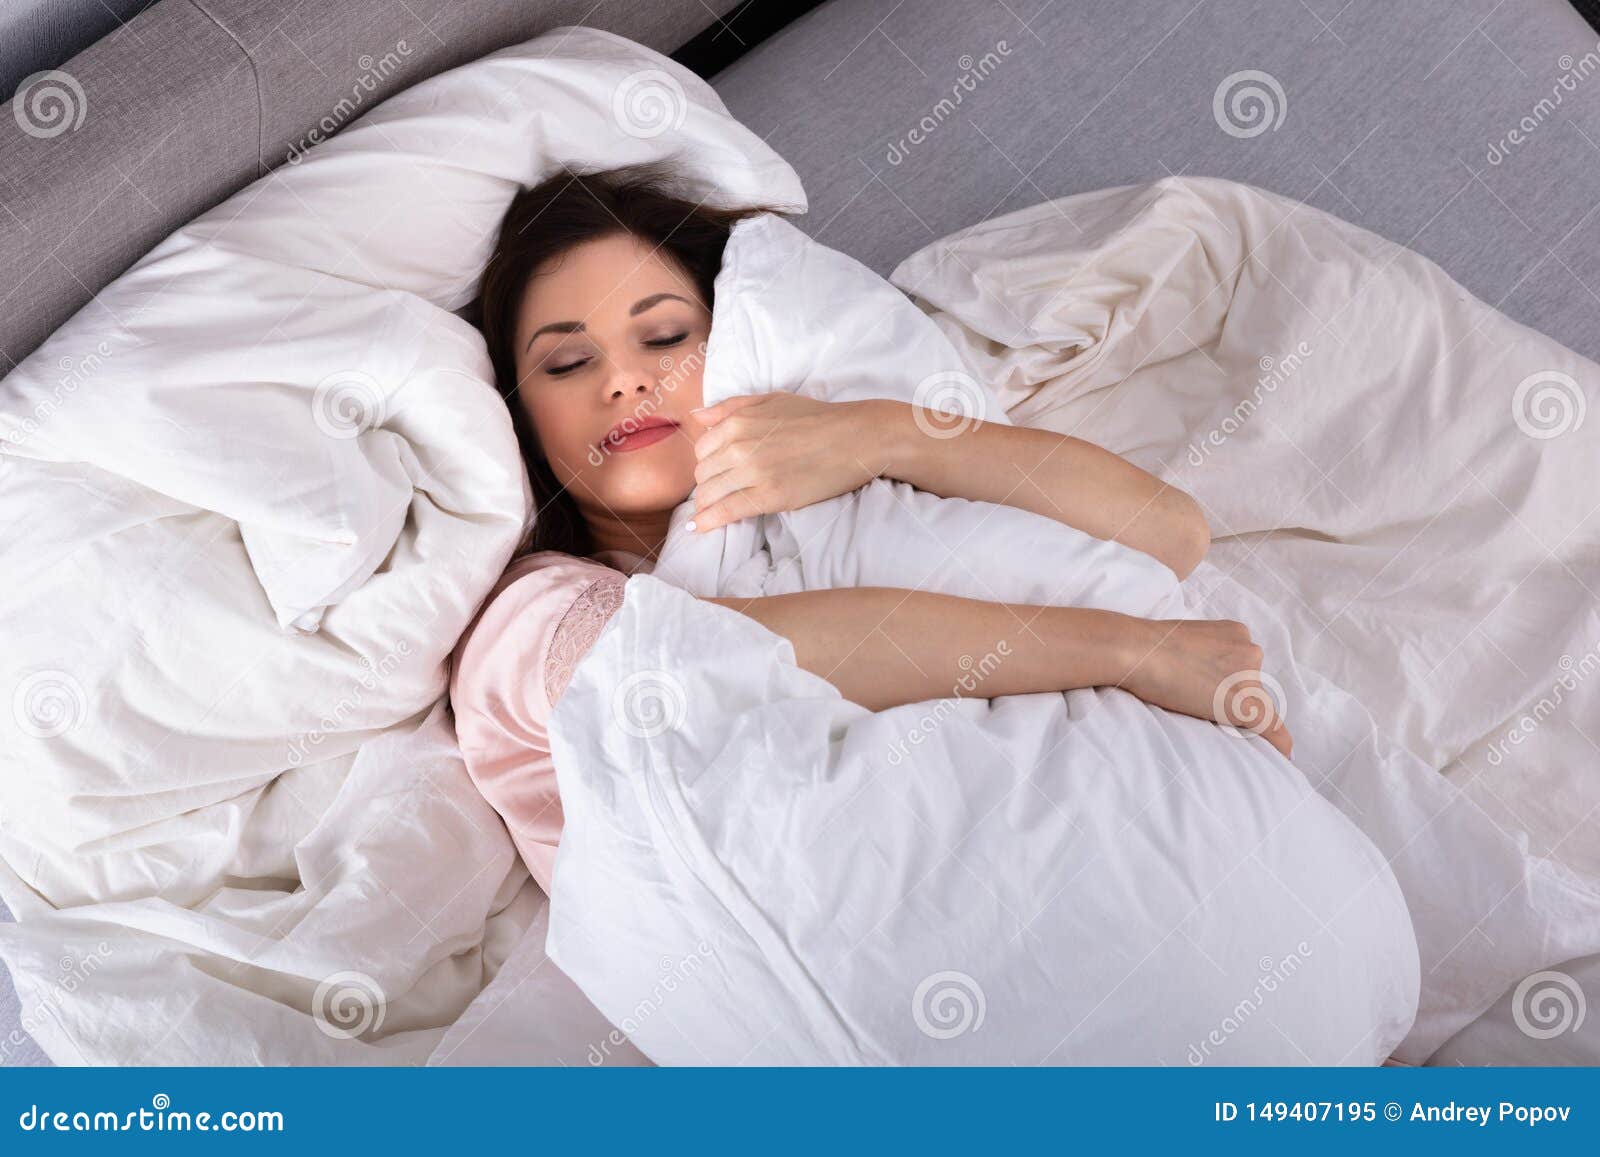 Woman Sleeping With Pillow Stock Image Image Of People 149407195